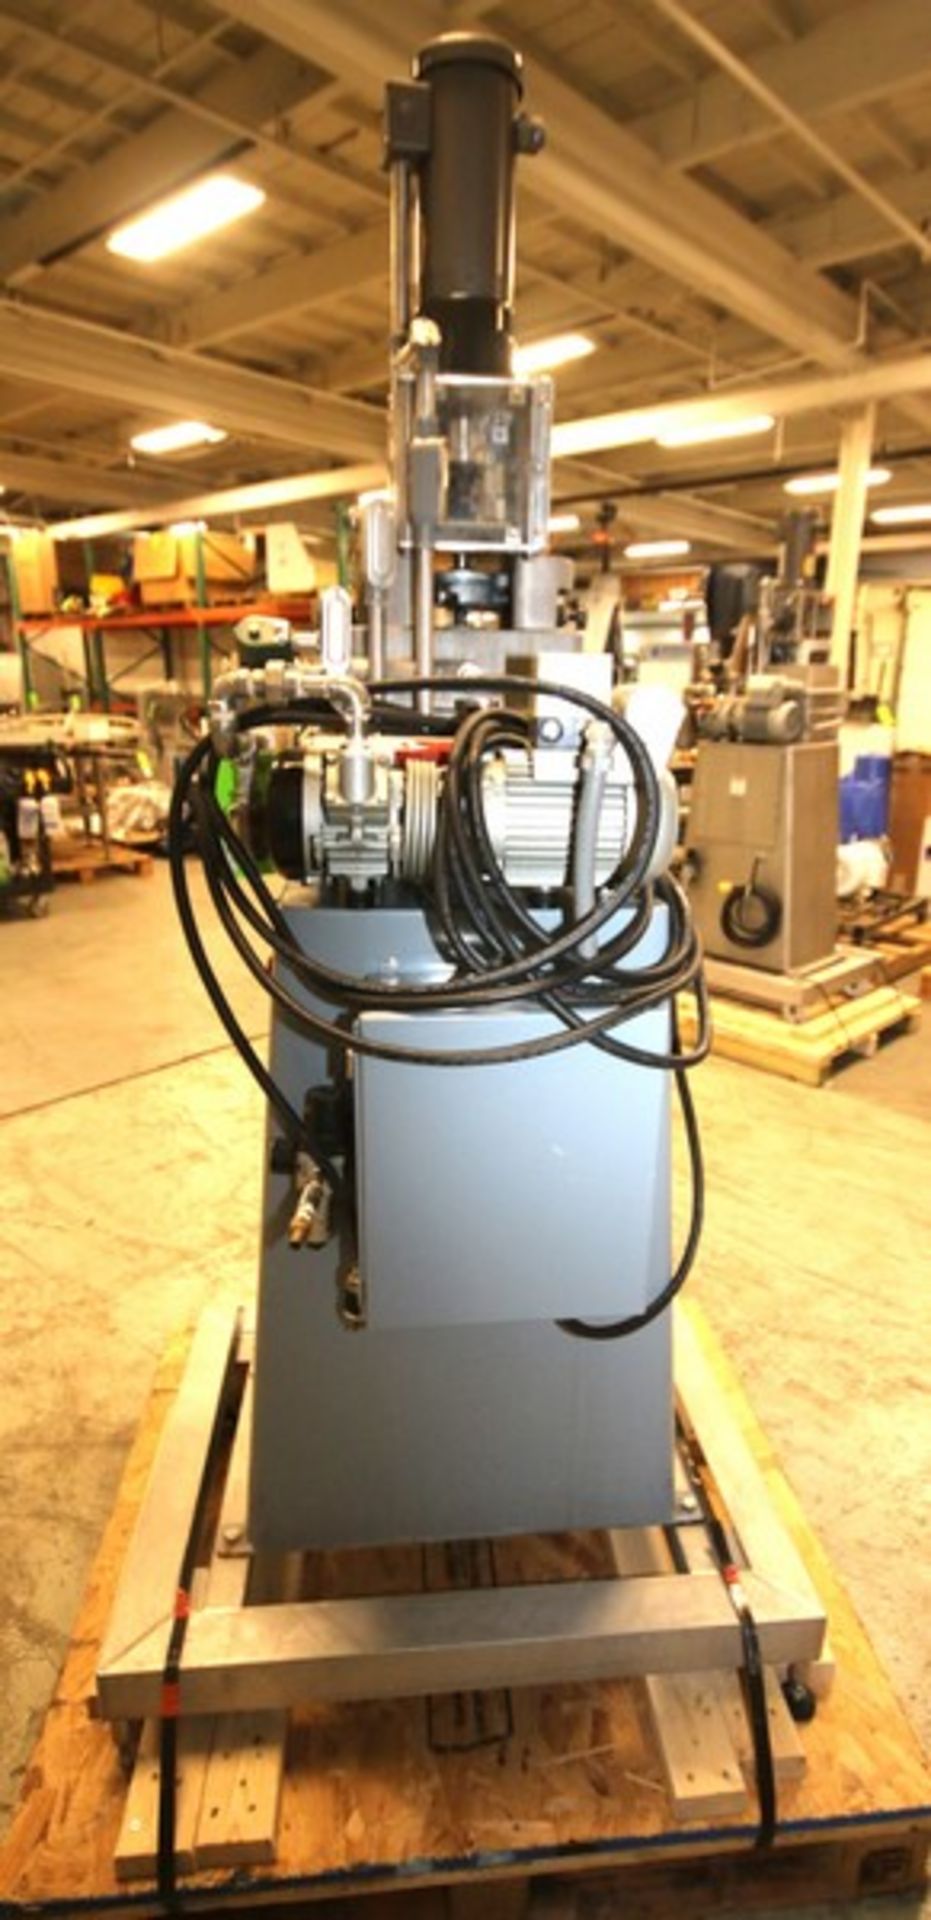 Dixie Double Can Seamer, Model UVGMD-ALCC, SN 95166, Busch On Board Vacuum Pump, 110/115V, Idec - Image 11 of 14